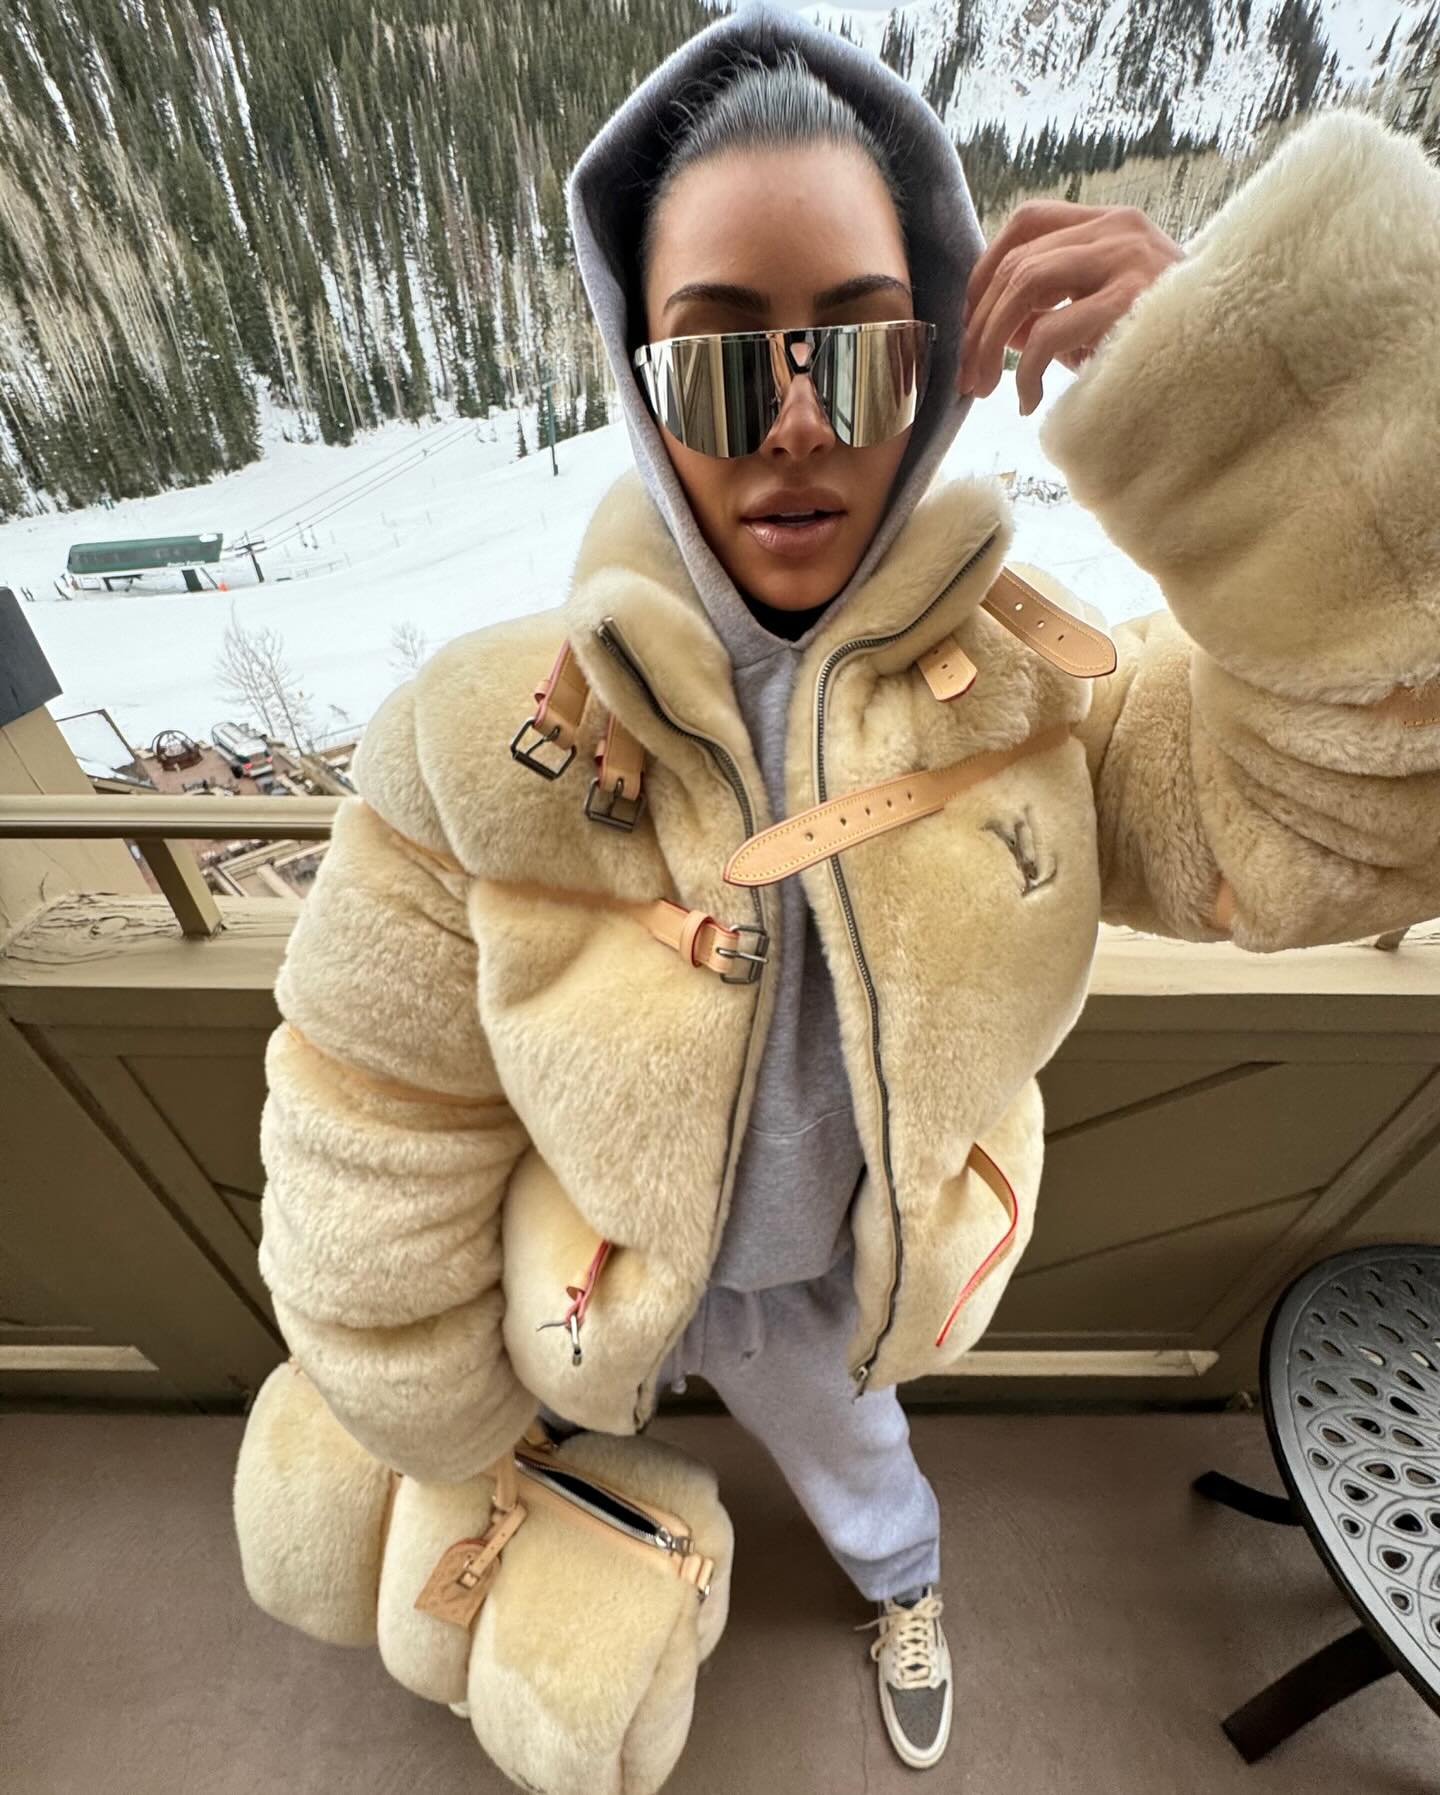 The Hulu personality flaunted a wool jacket as well as a matching bag while vacationing in Utah